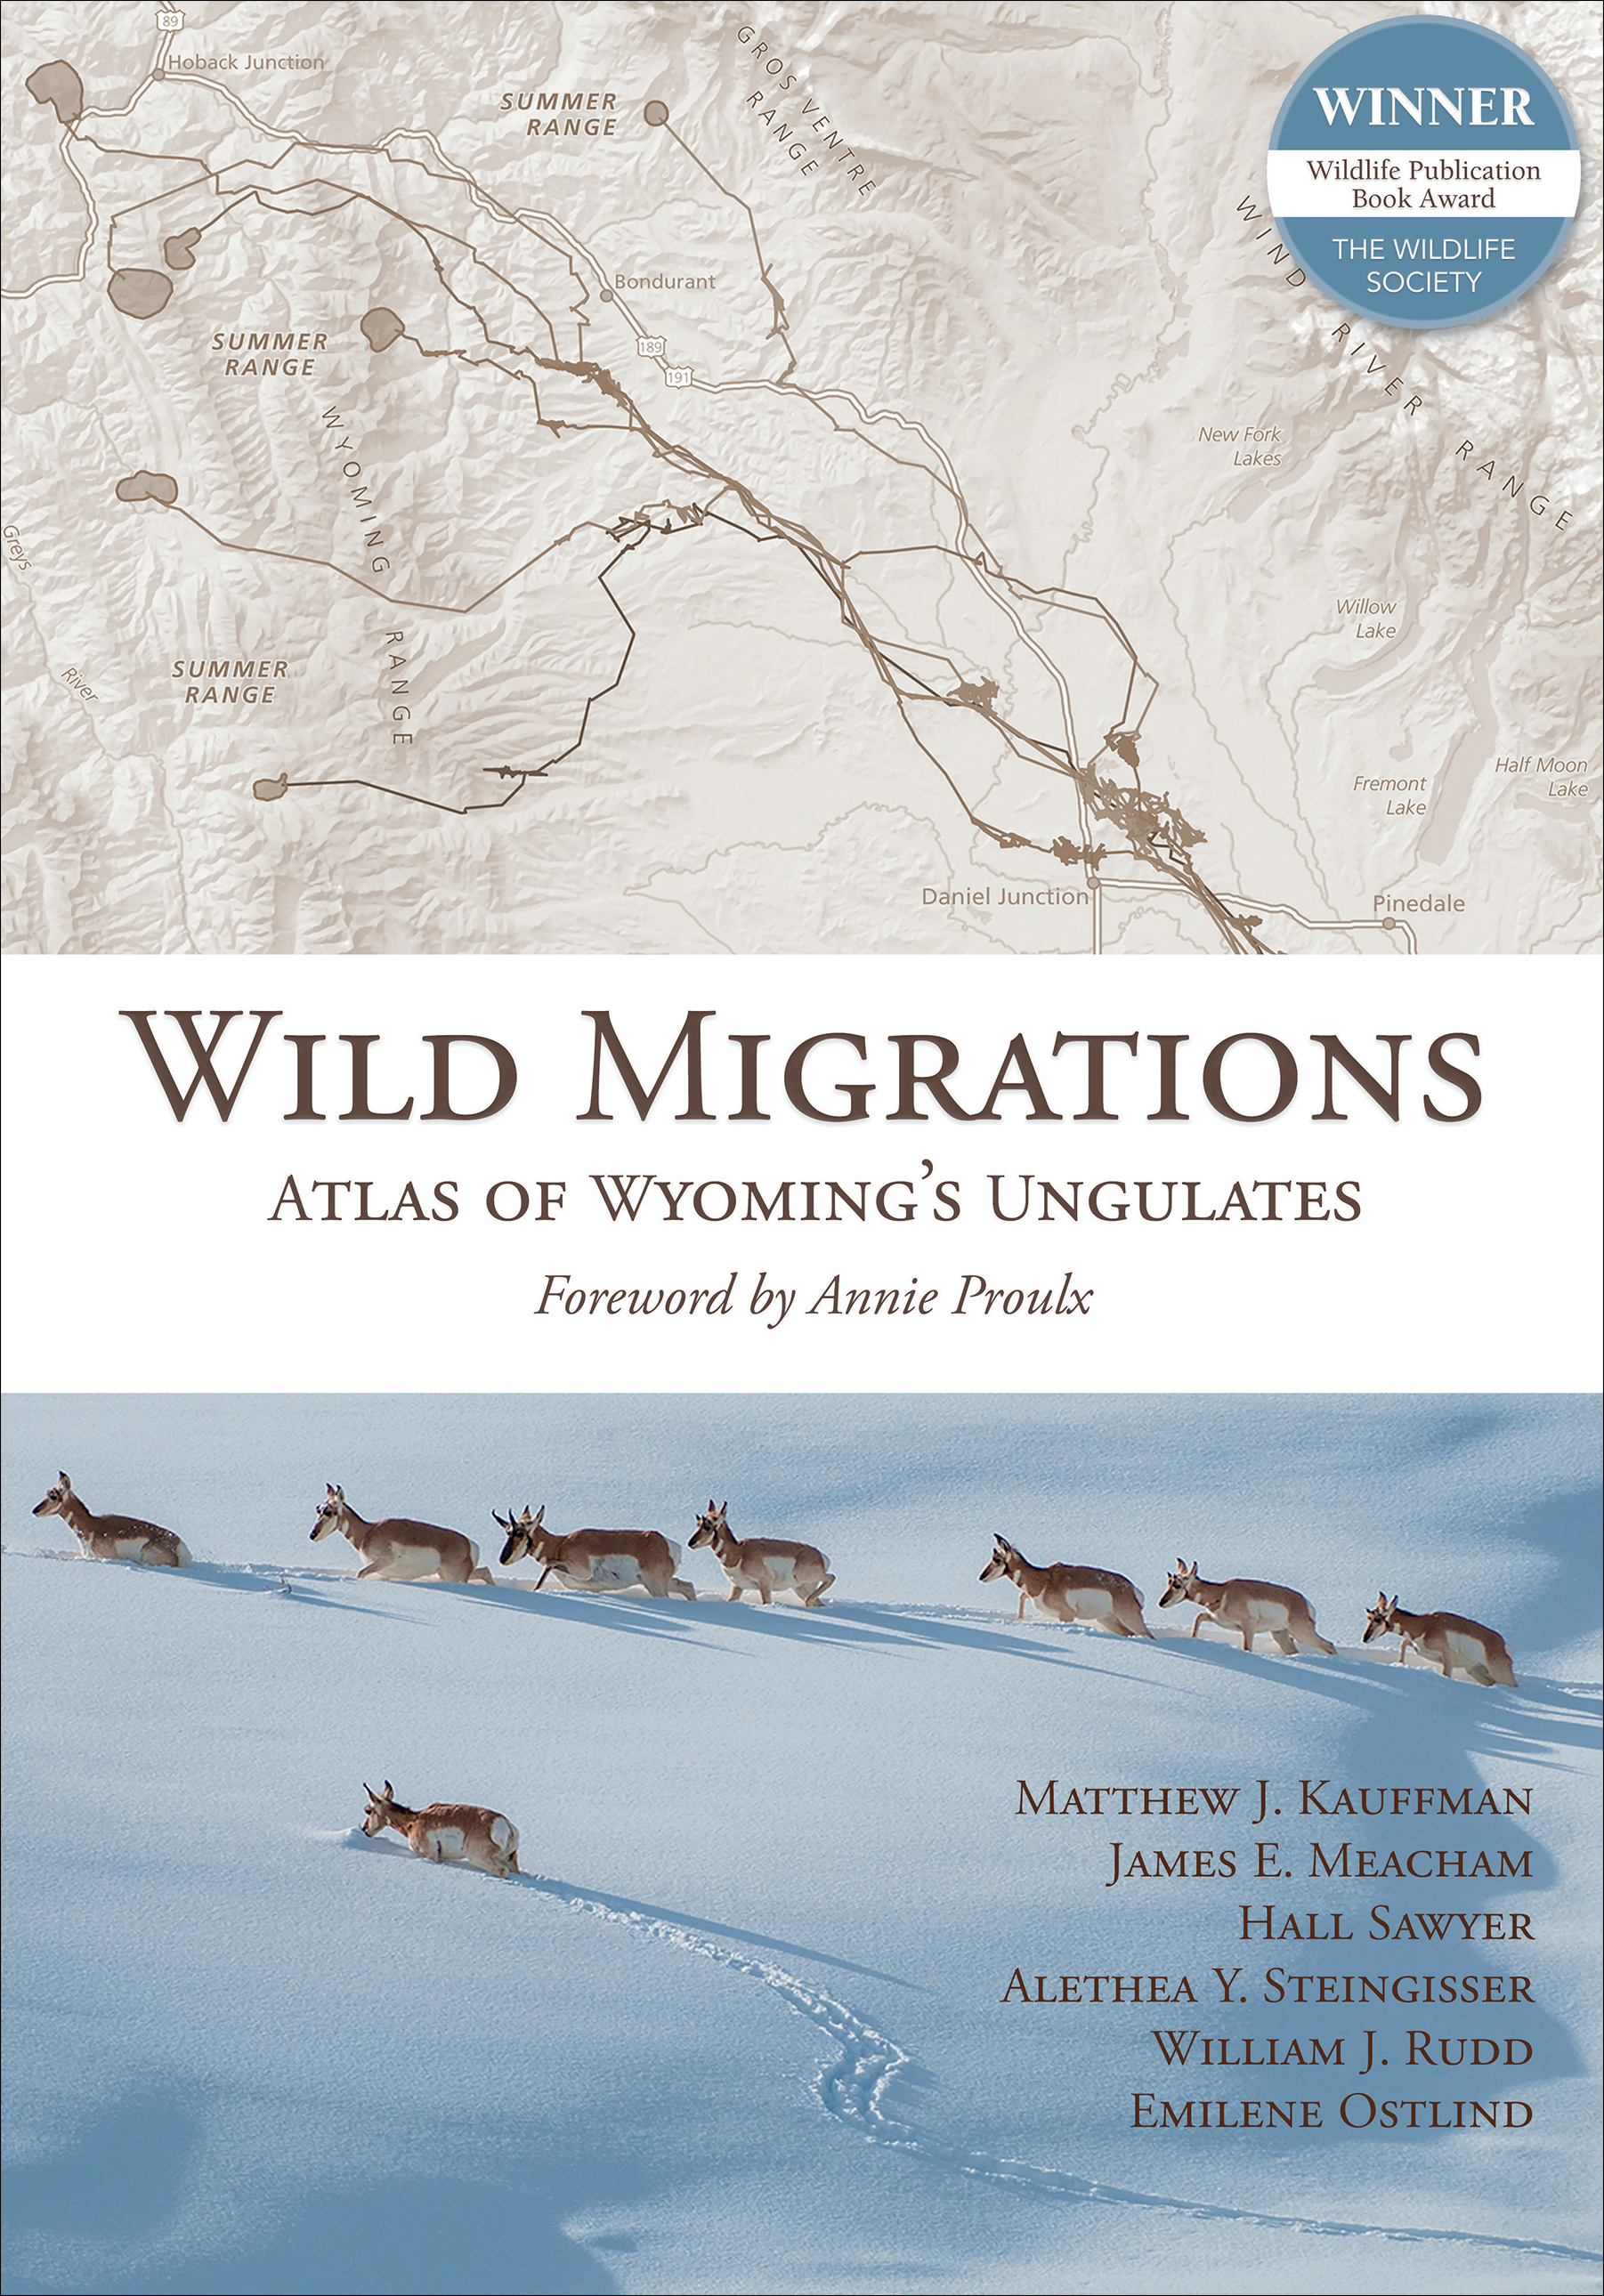 How to Conserve Wildlife Migrations in the American West